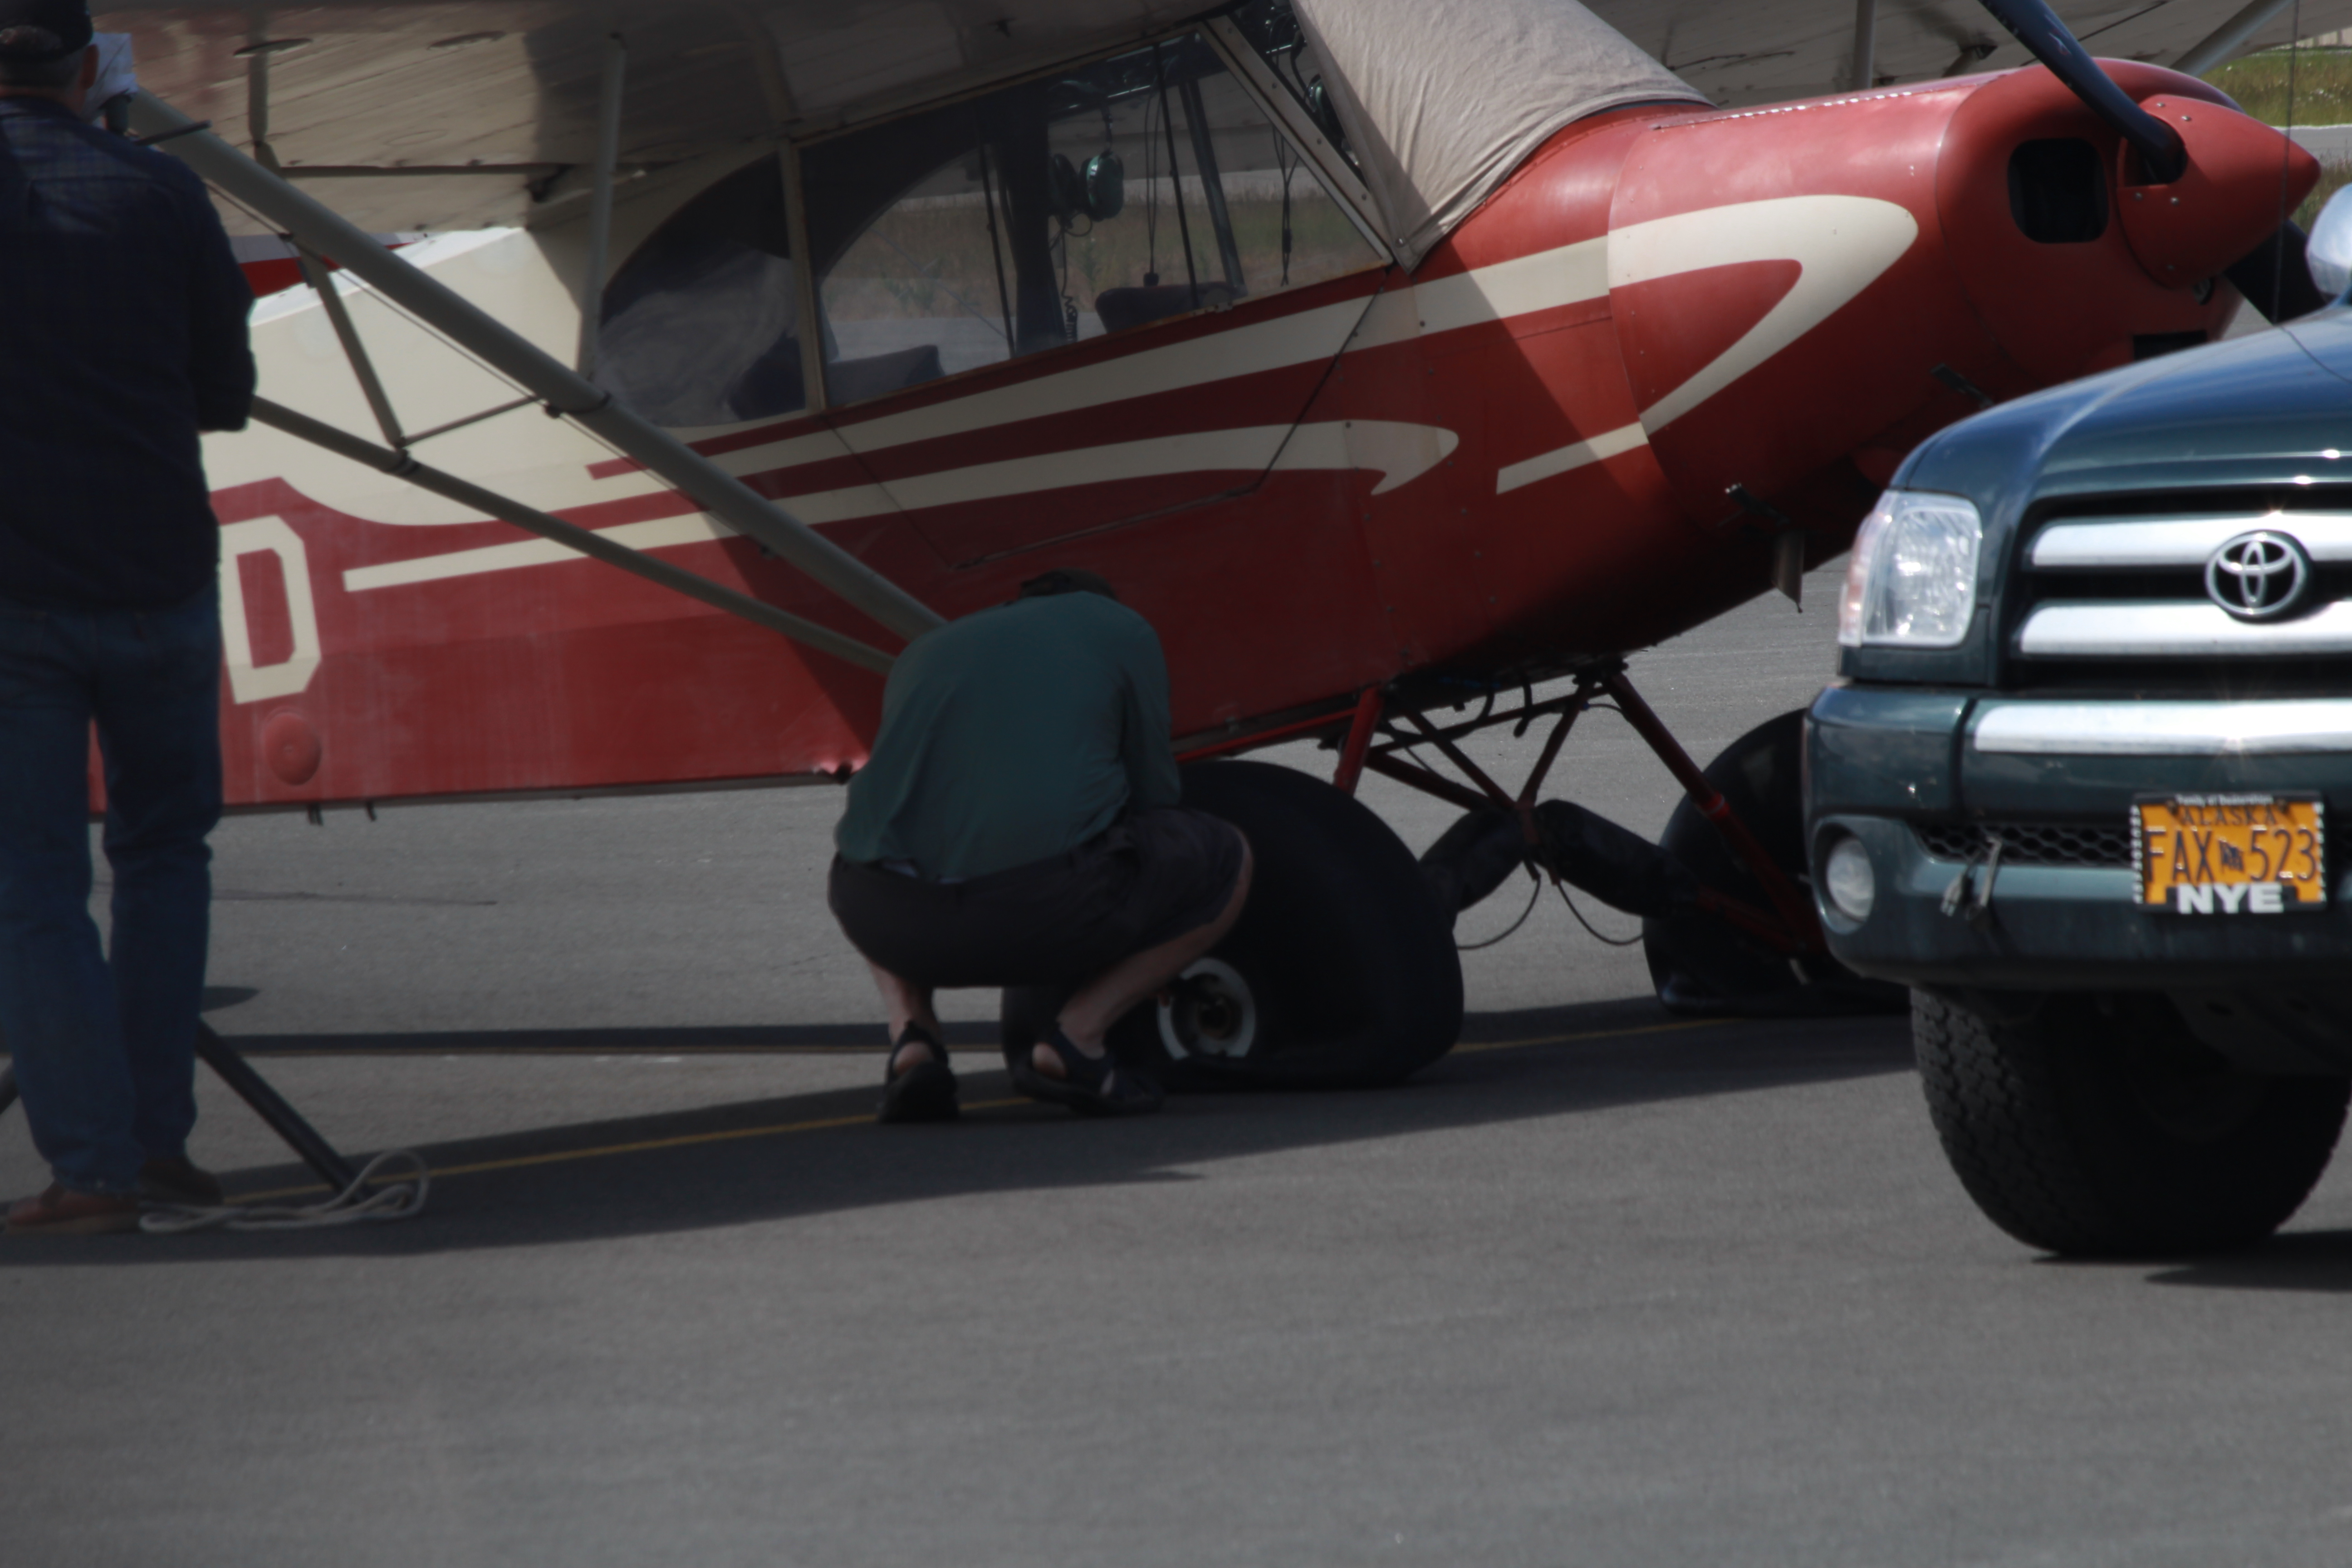 One of the victims of the tire slashings repairs his plane at Merrill Field (Photo by Wesley Early, Alaska Public Media - Anchorage)